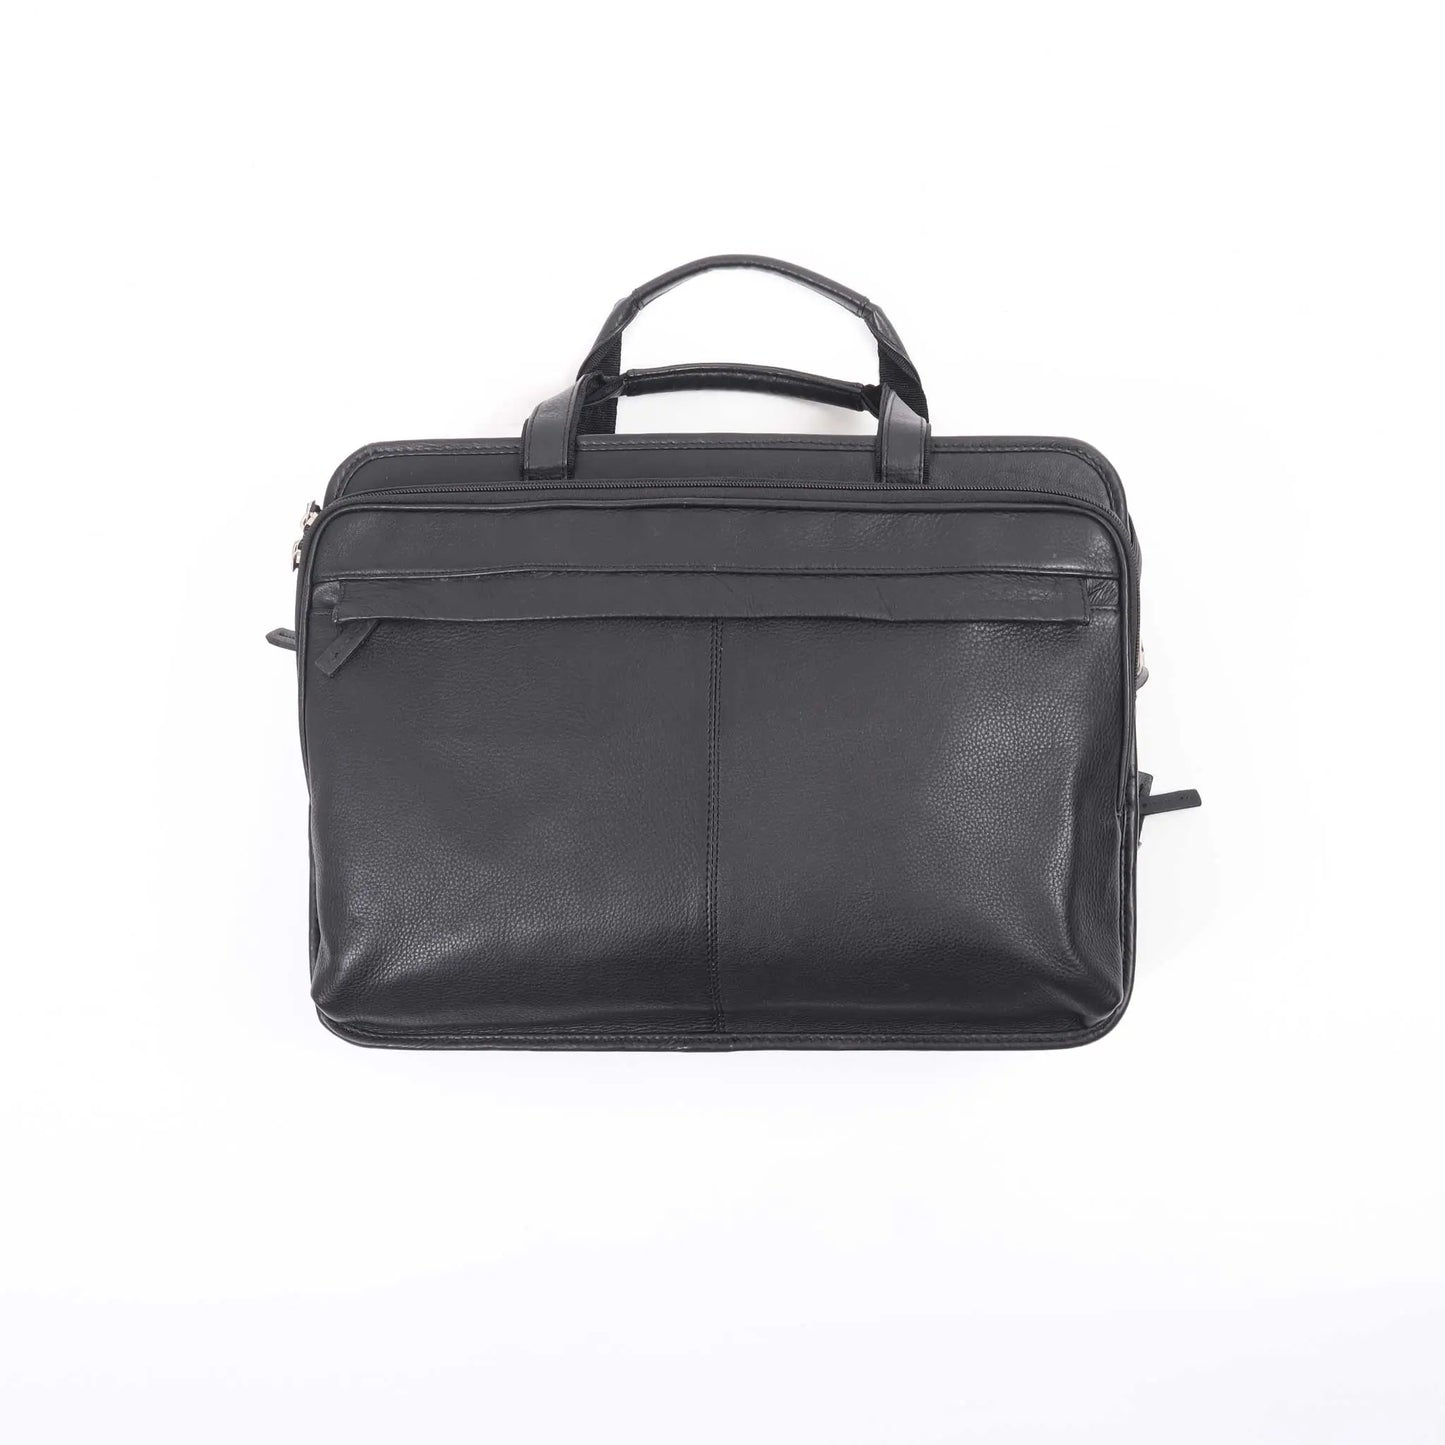 Leather Briefcase Laptop Bag | Black - Larimars Clothing Men's Formal and casual wear shirts